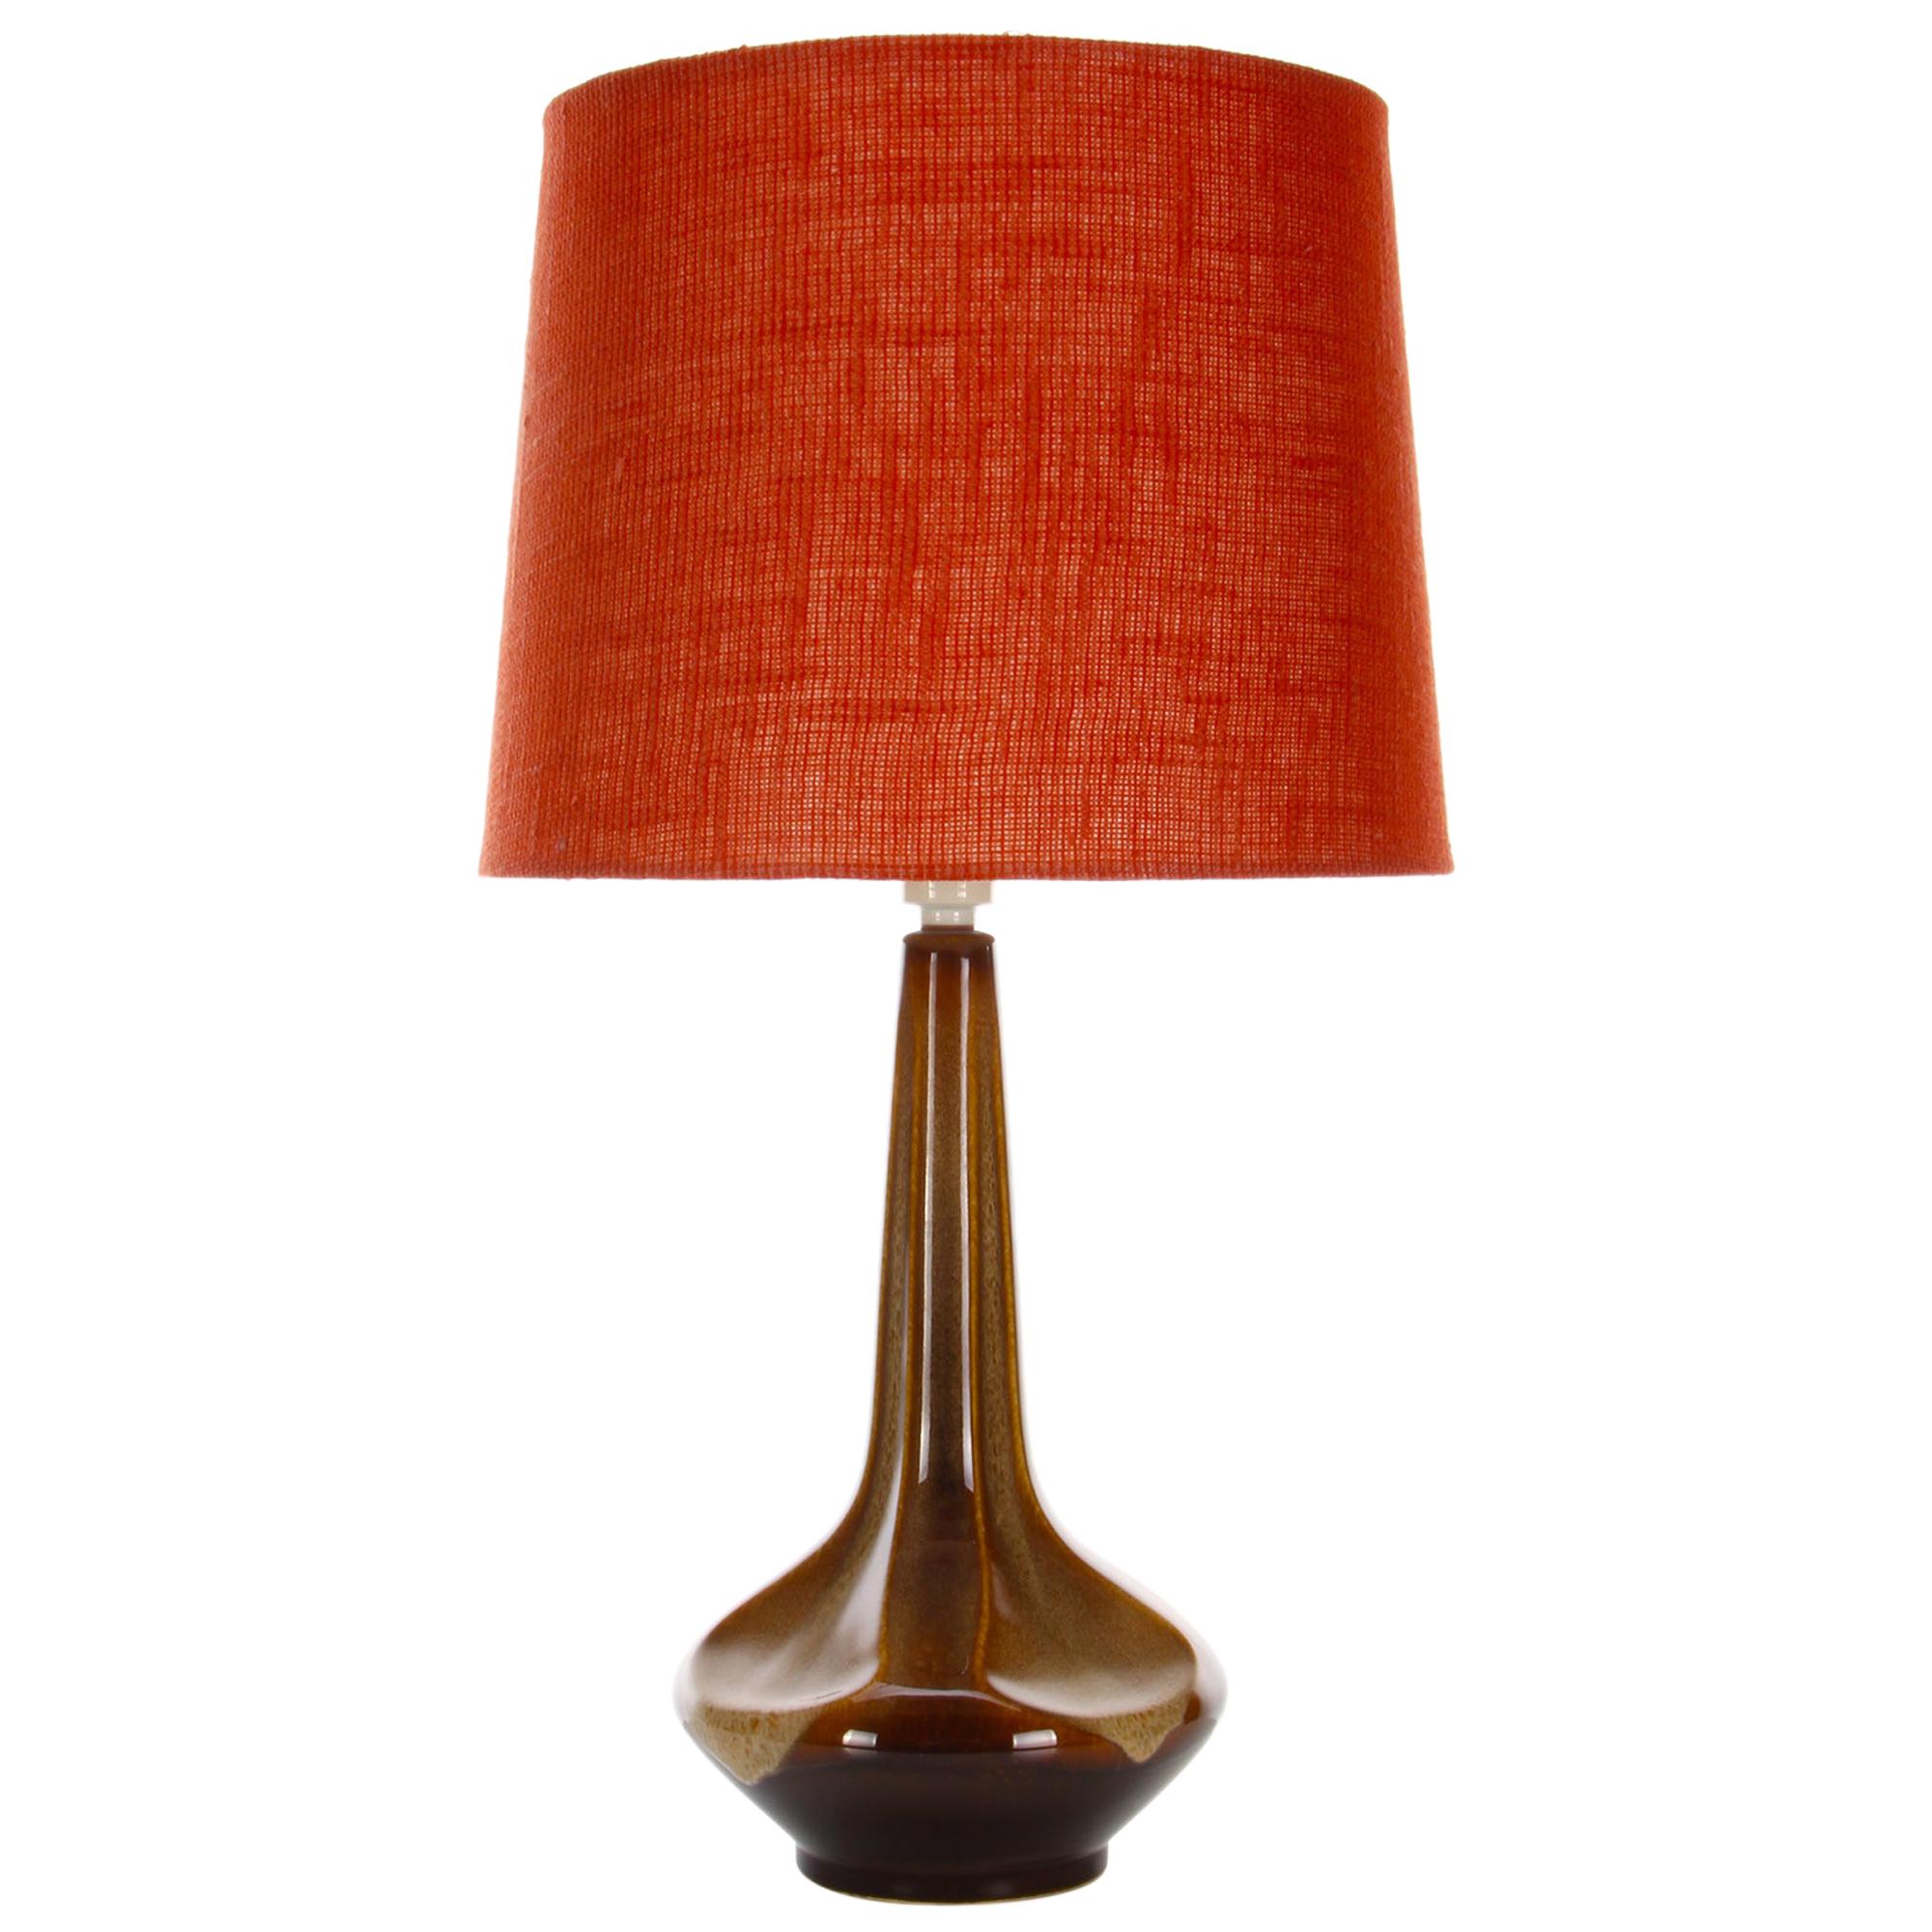 Large Brown Table Lamp by Einar Johansen for Soholm 1960s, with Vintage Shade